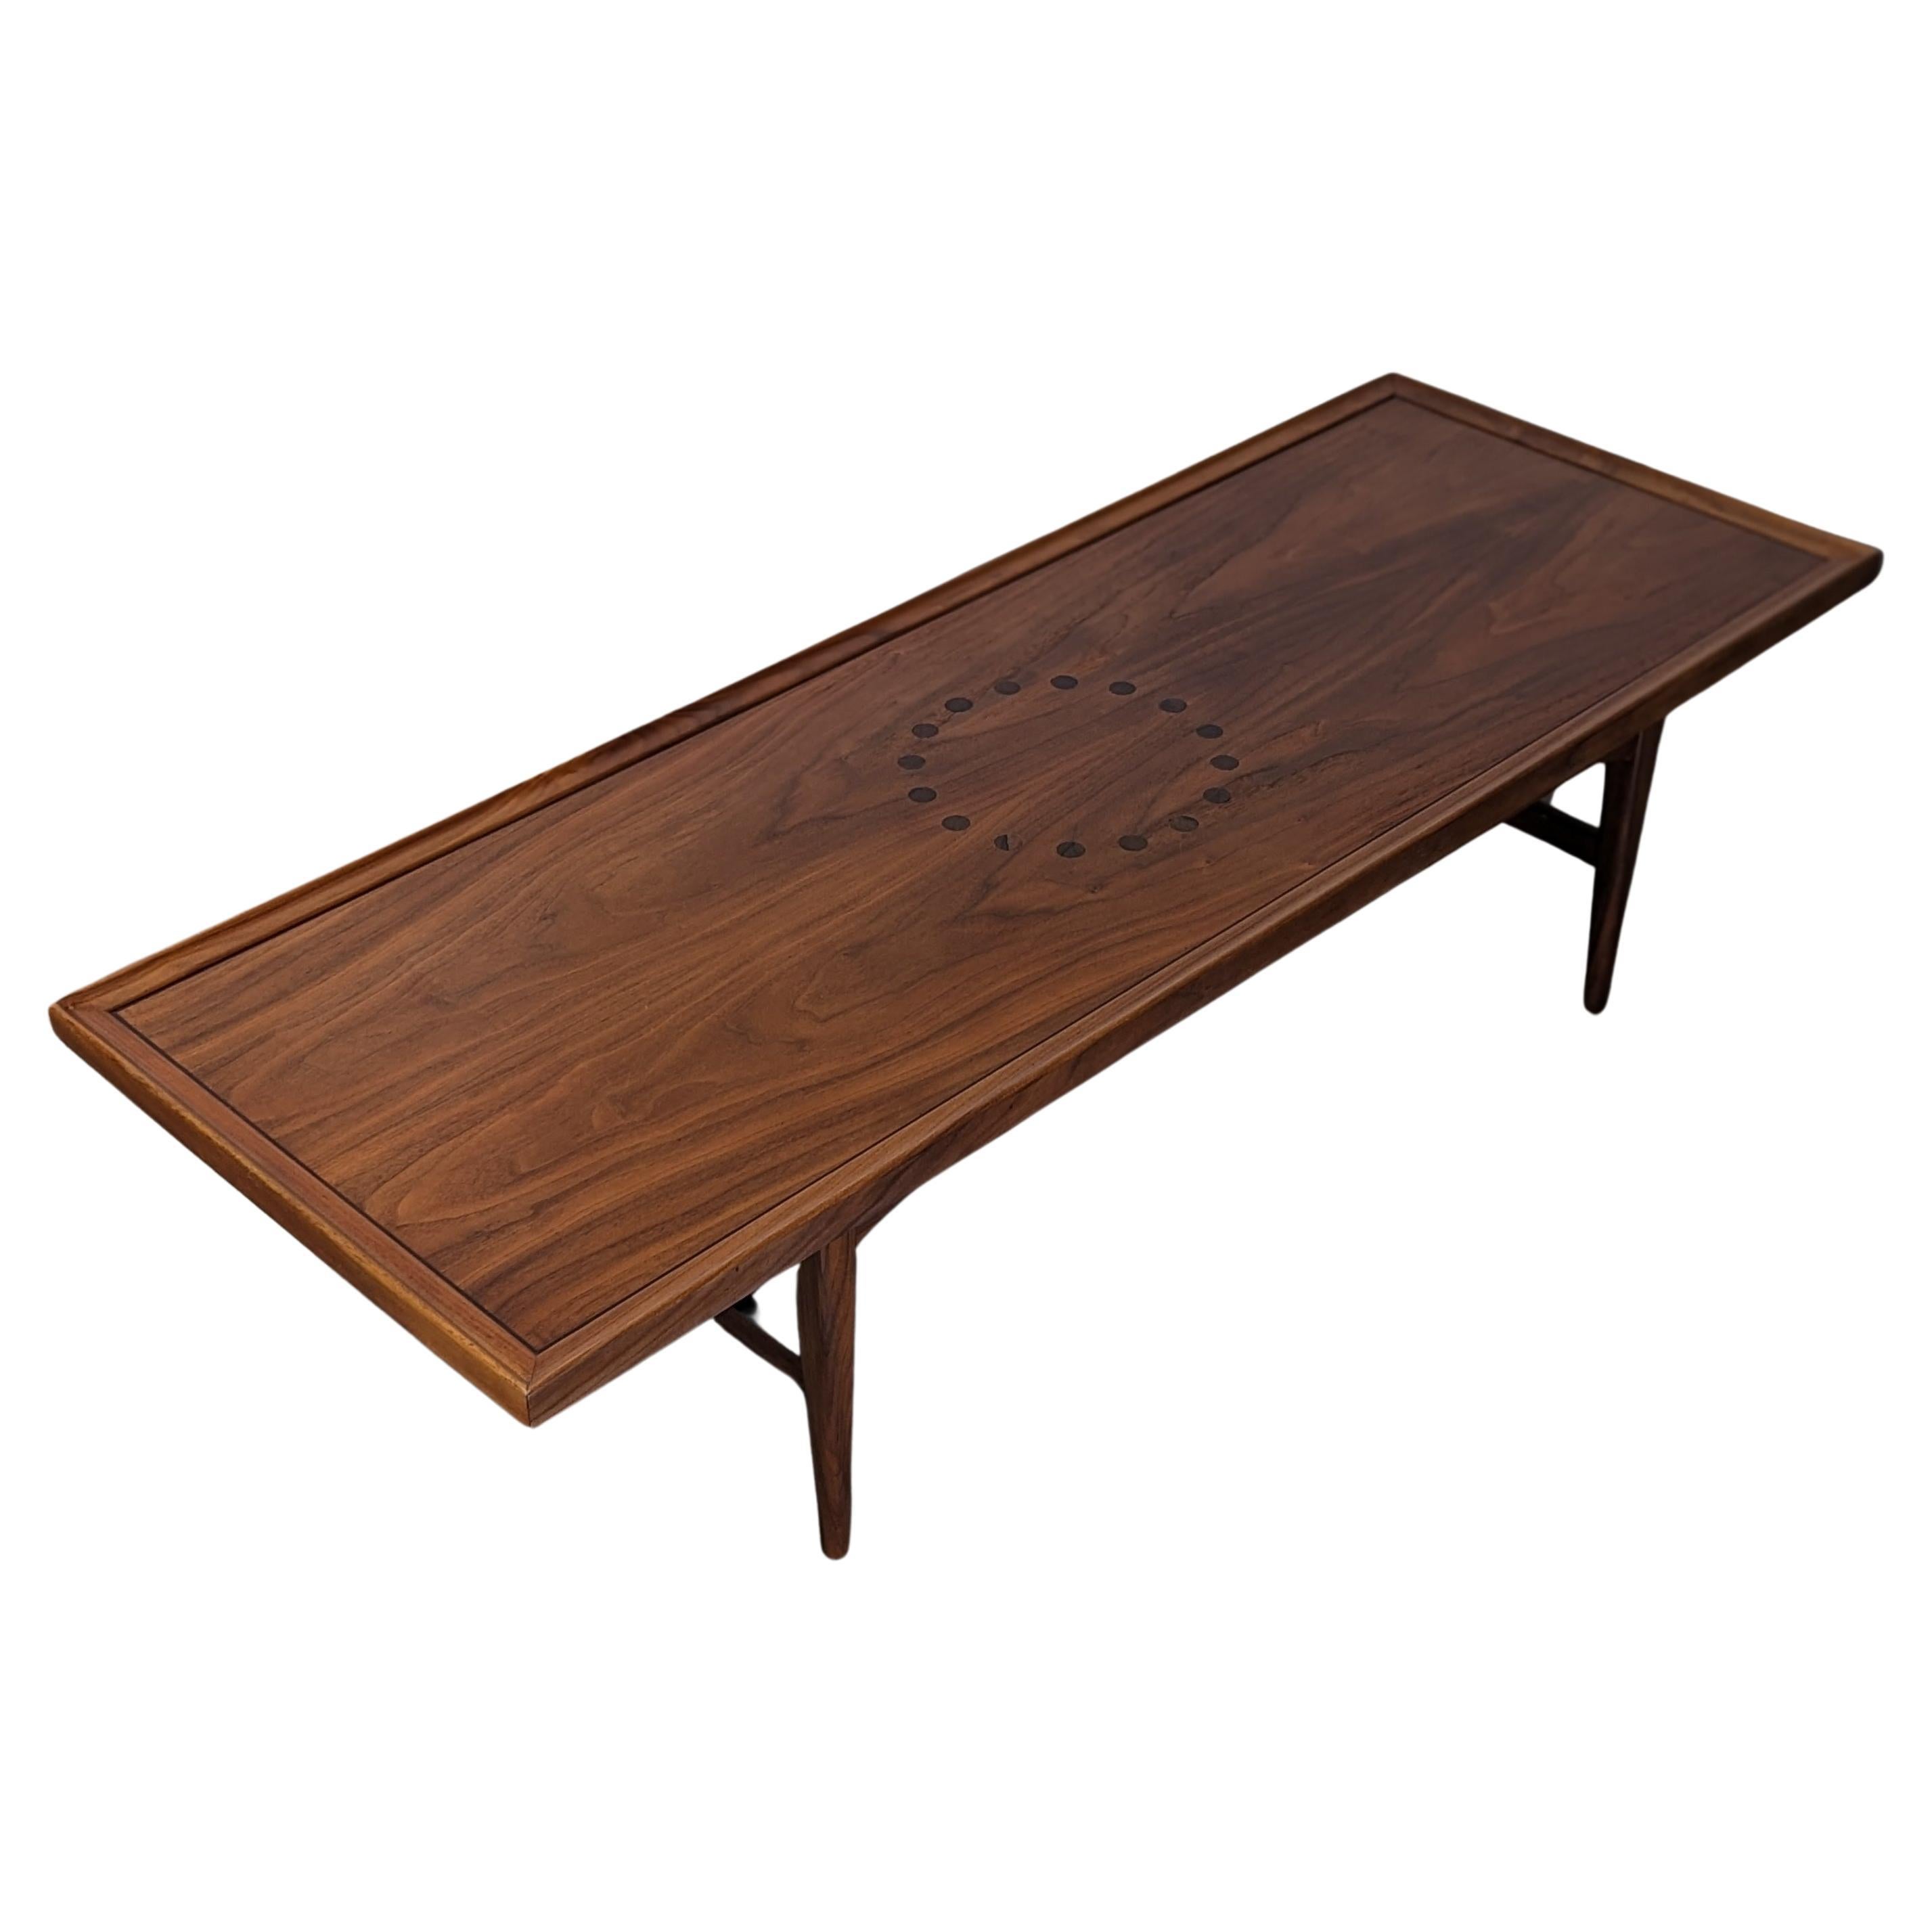 Mid Century Modern Coffee Table By Drexel, Declaration Line, c1960s For Sale